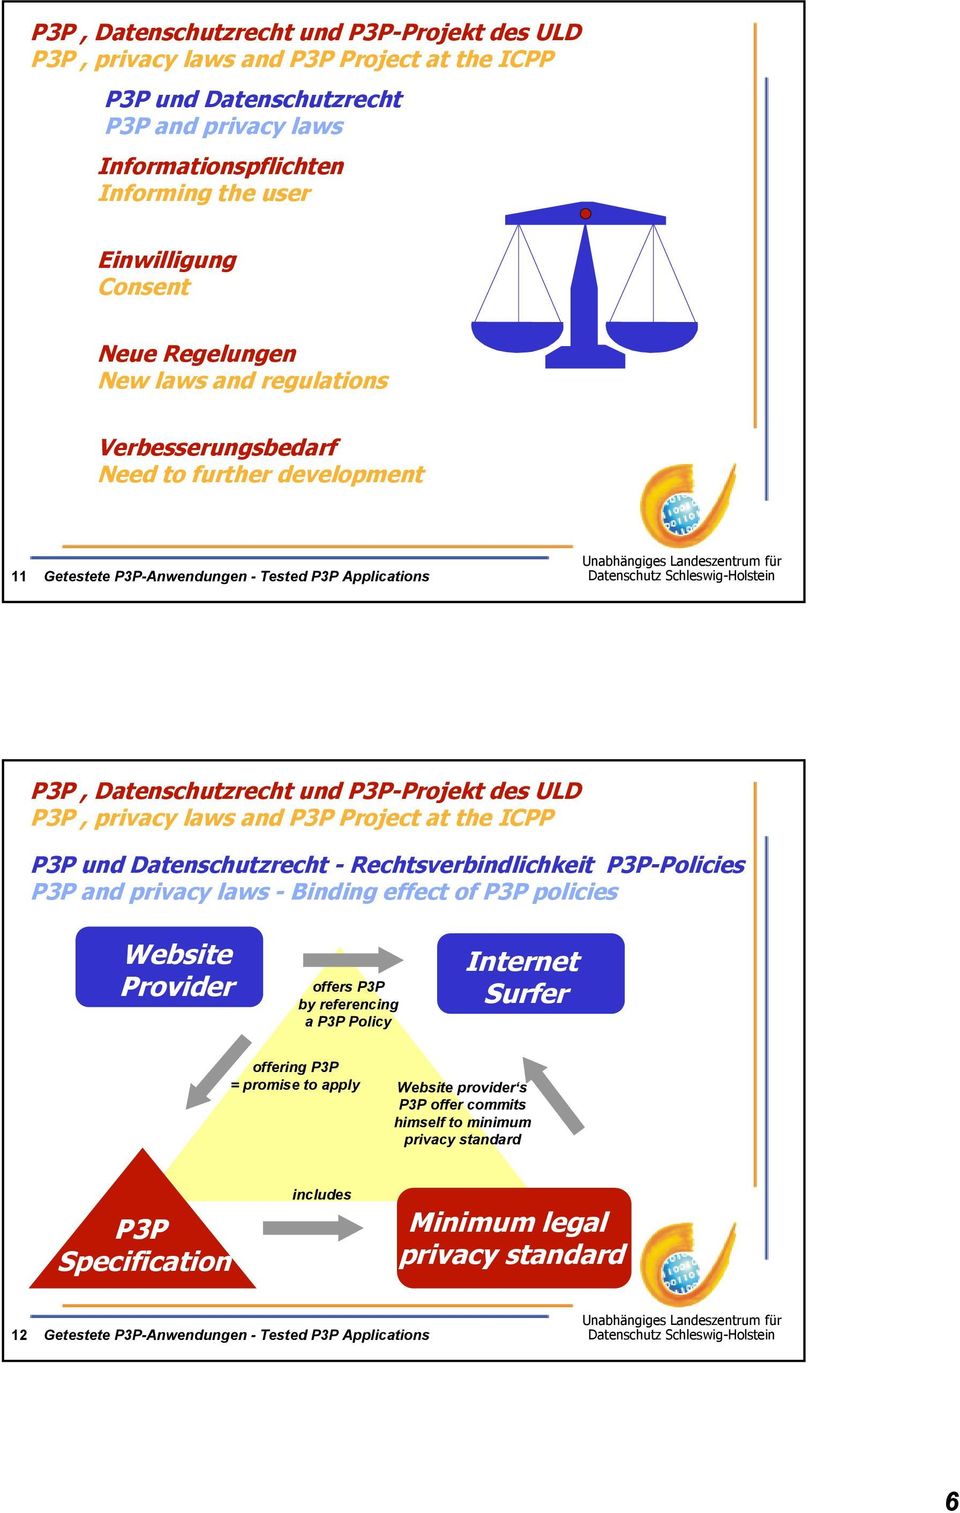 Rechtsverbindlichkeit P3P-Policies P3P and privacy laws - Binding effect of P3P policies Website Provider offers P3P by referencing a P3P Policy Internet Surfer